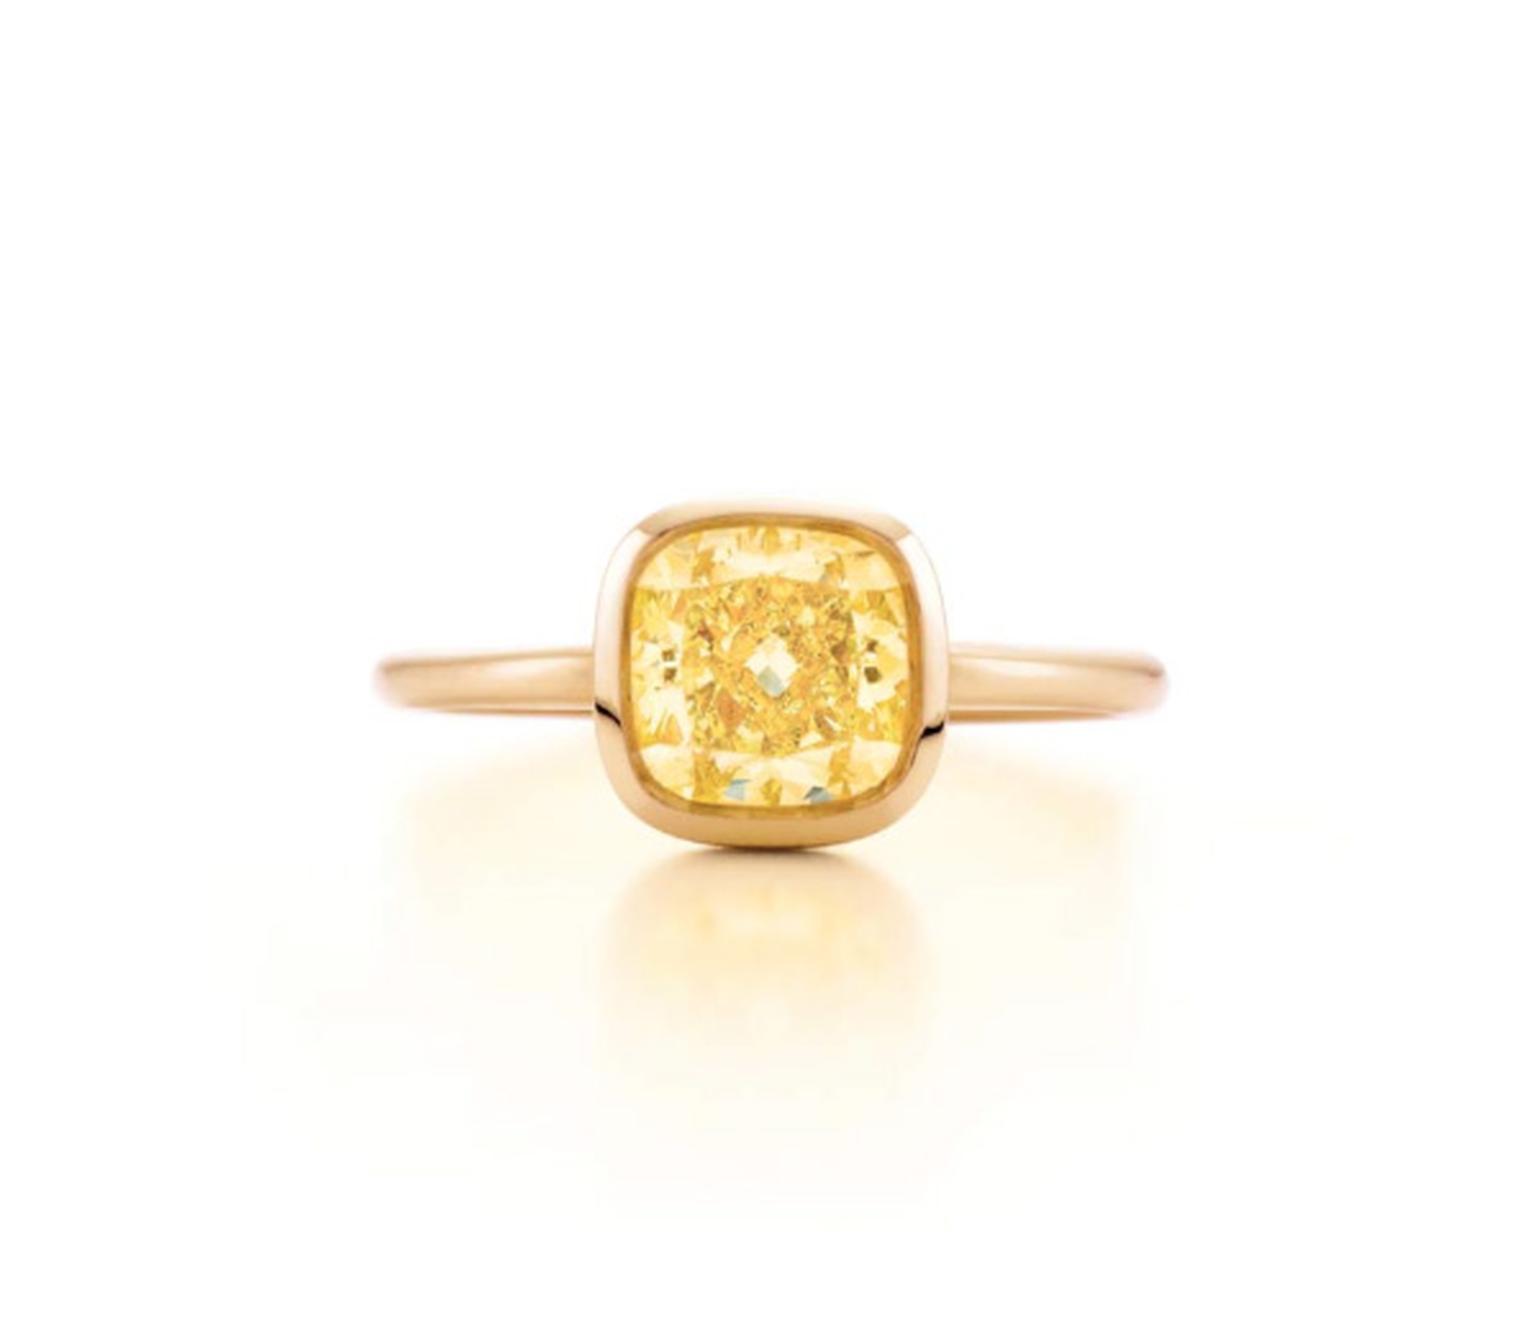 Tiffany & Co. cushion-cut yellow diamond engagement ring in pink gold